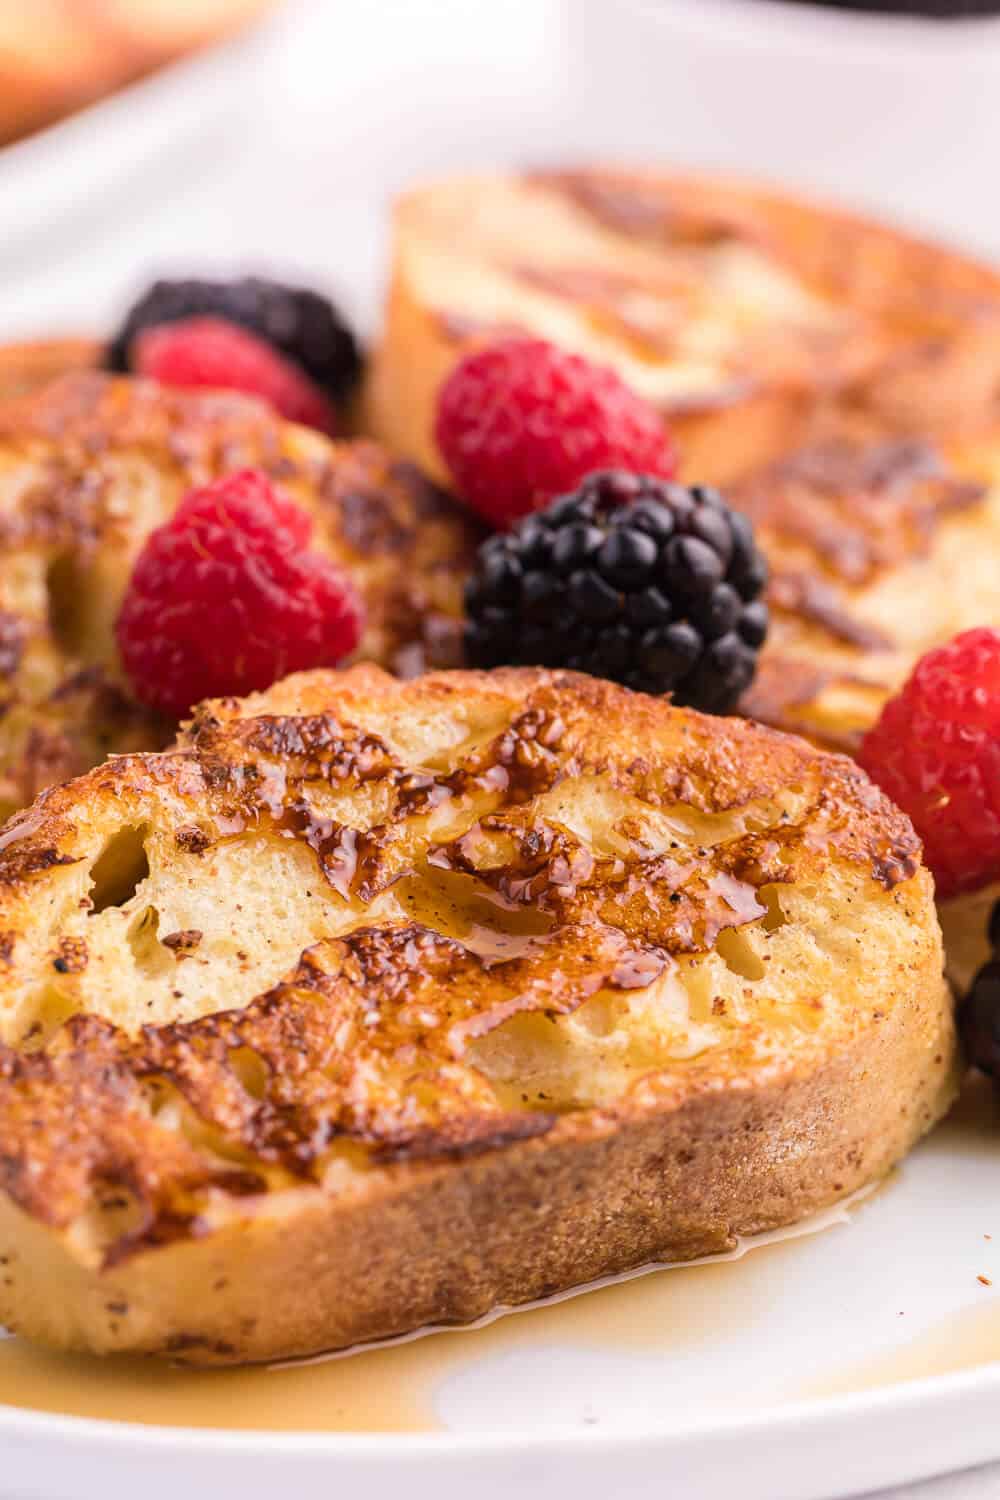 Baked French Toast - Make it the night before and bake it the next morning for breakfast! Healthy, delicious and sugar free!